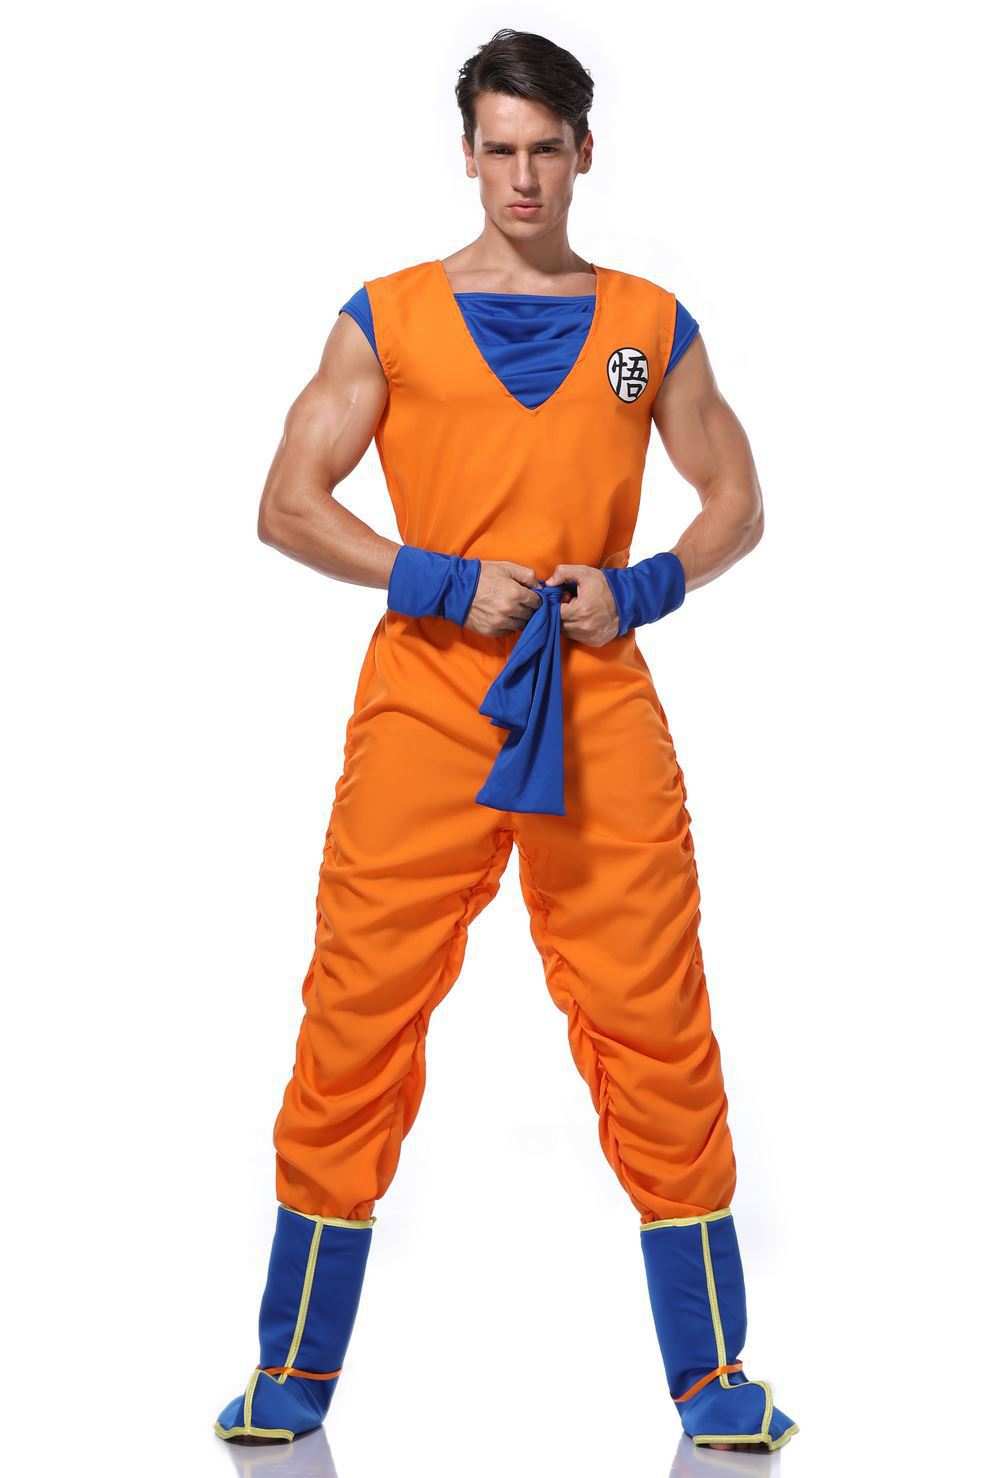  Dragon Ball Z Kids Vegeta Costume, Anime Saiyan Battle Armor  Jumpsuit, Cartoon Fighter Halloween Outfit : Clothing, Shoes & Jewelry